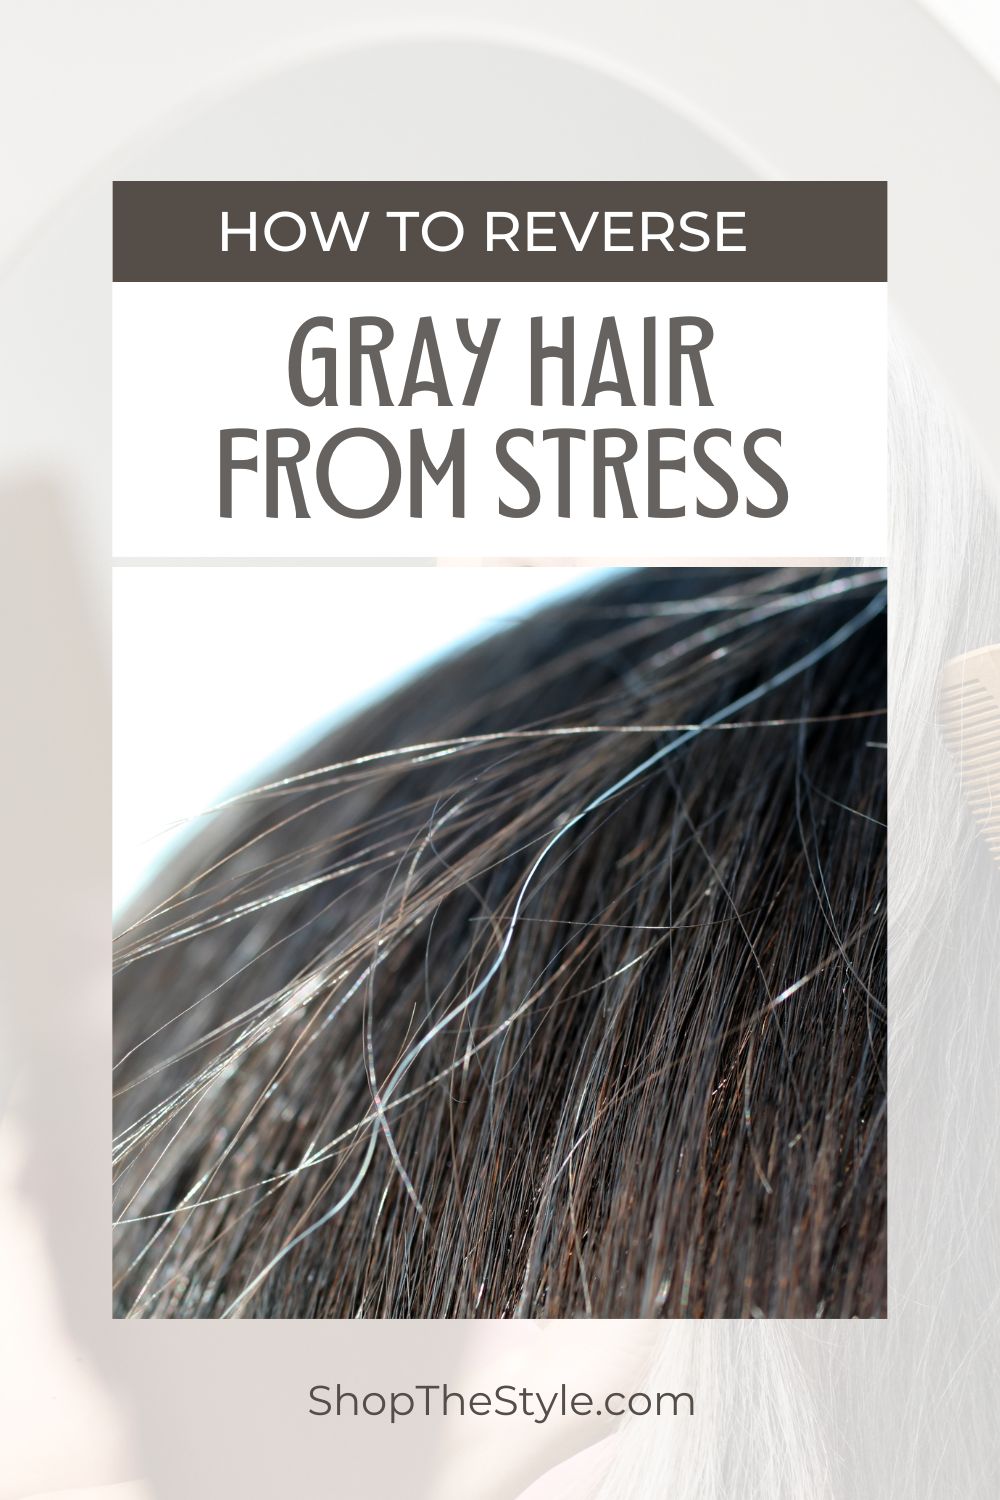 How To Reverse Gray Hair From Stress